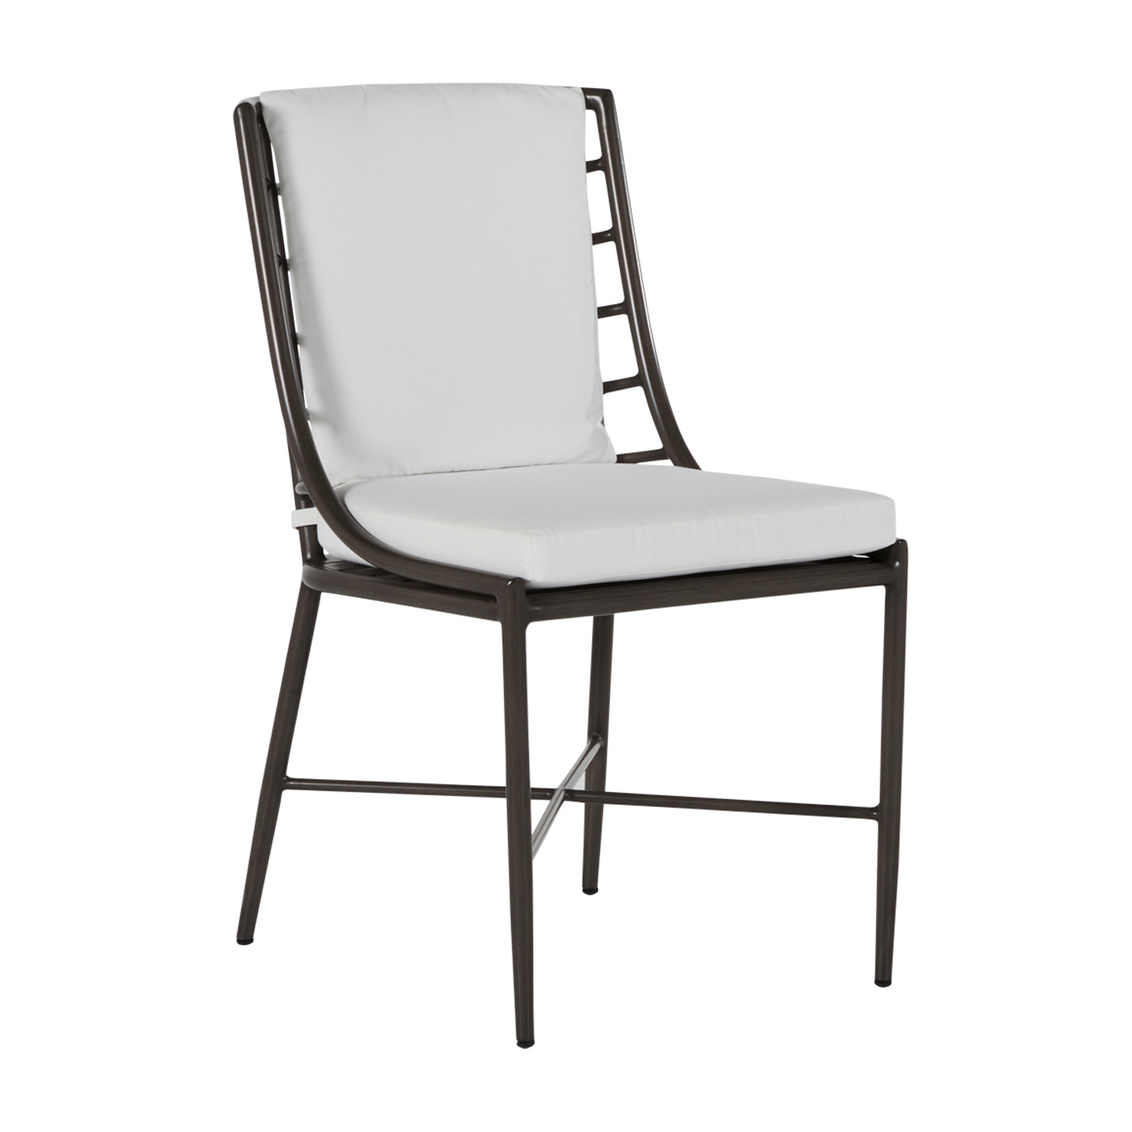 carmel aluminum side chair in slate grey – frame only product image